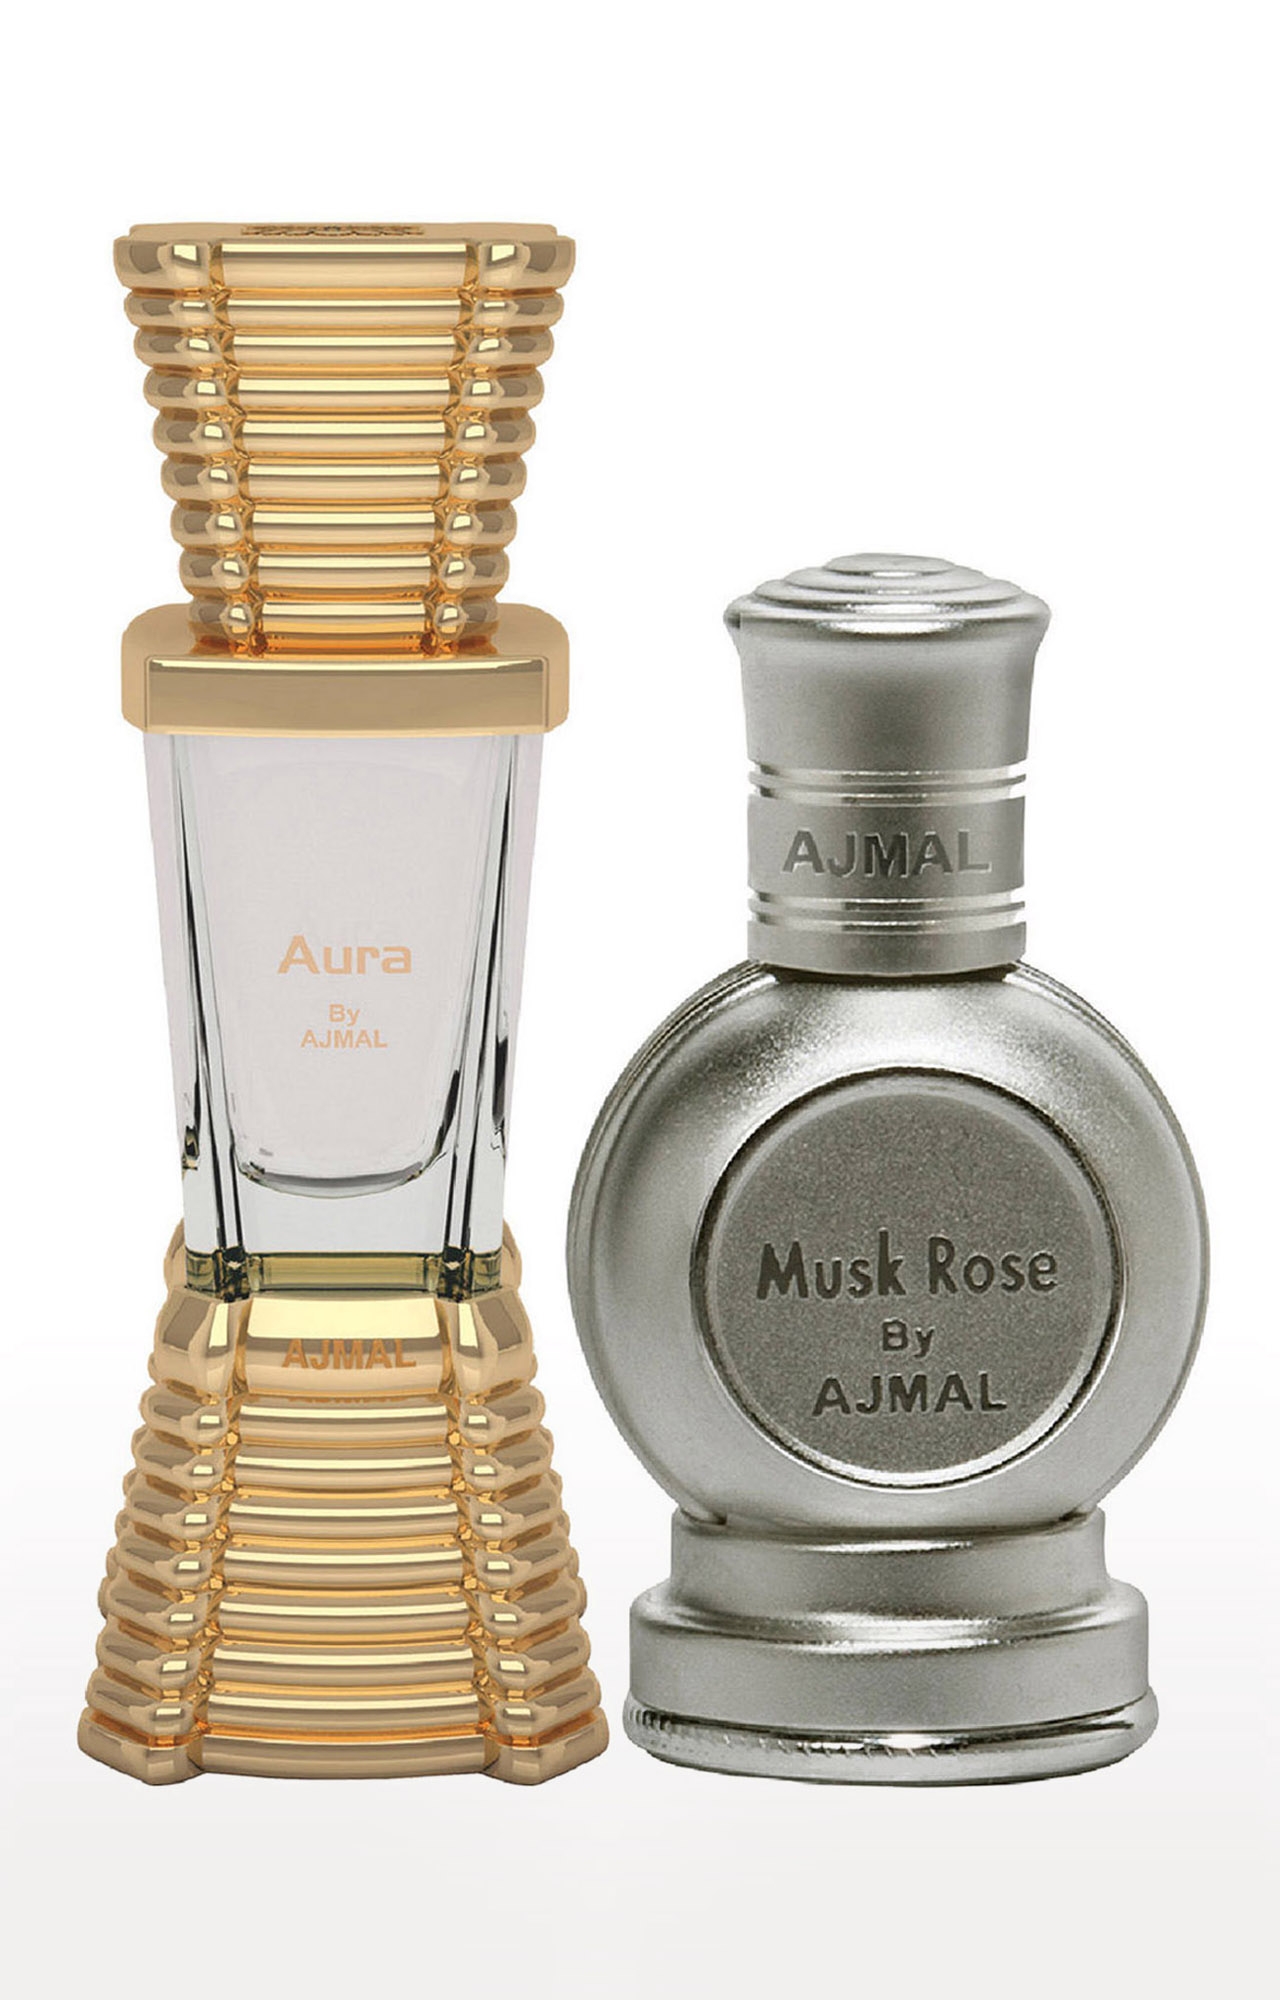 Ajmal Aura Concentrated Perfume Oil Alcohol-free Attar 10ml for Unisex and Musk Rose Concentrated Perfume Oil Musky Alcohol-free Attar 12ml for Unisex